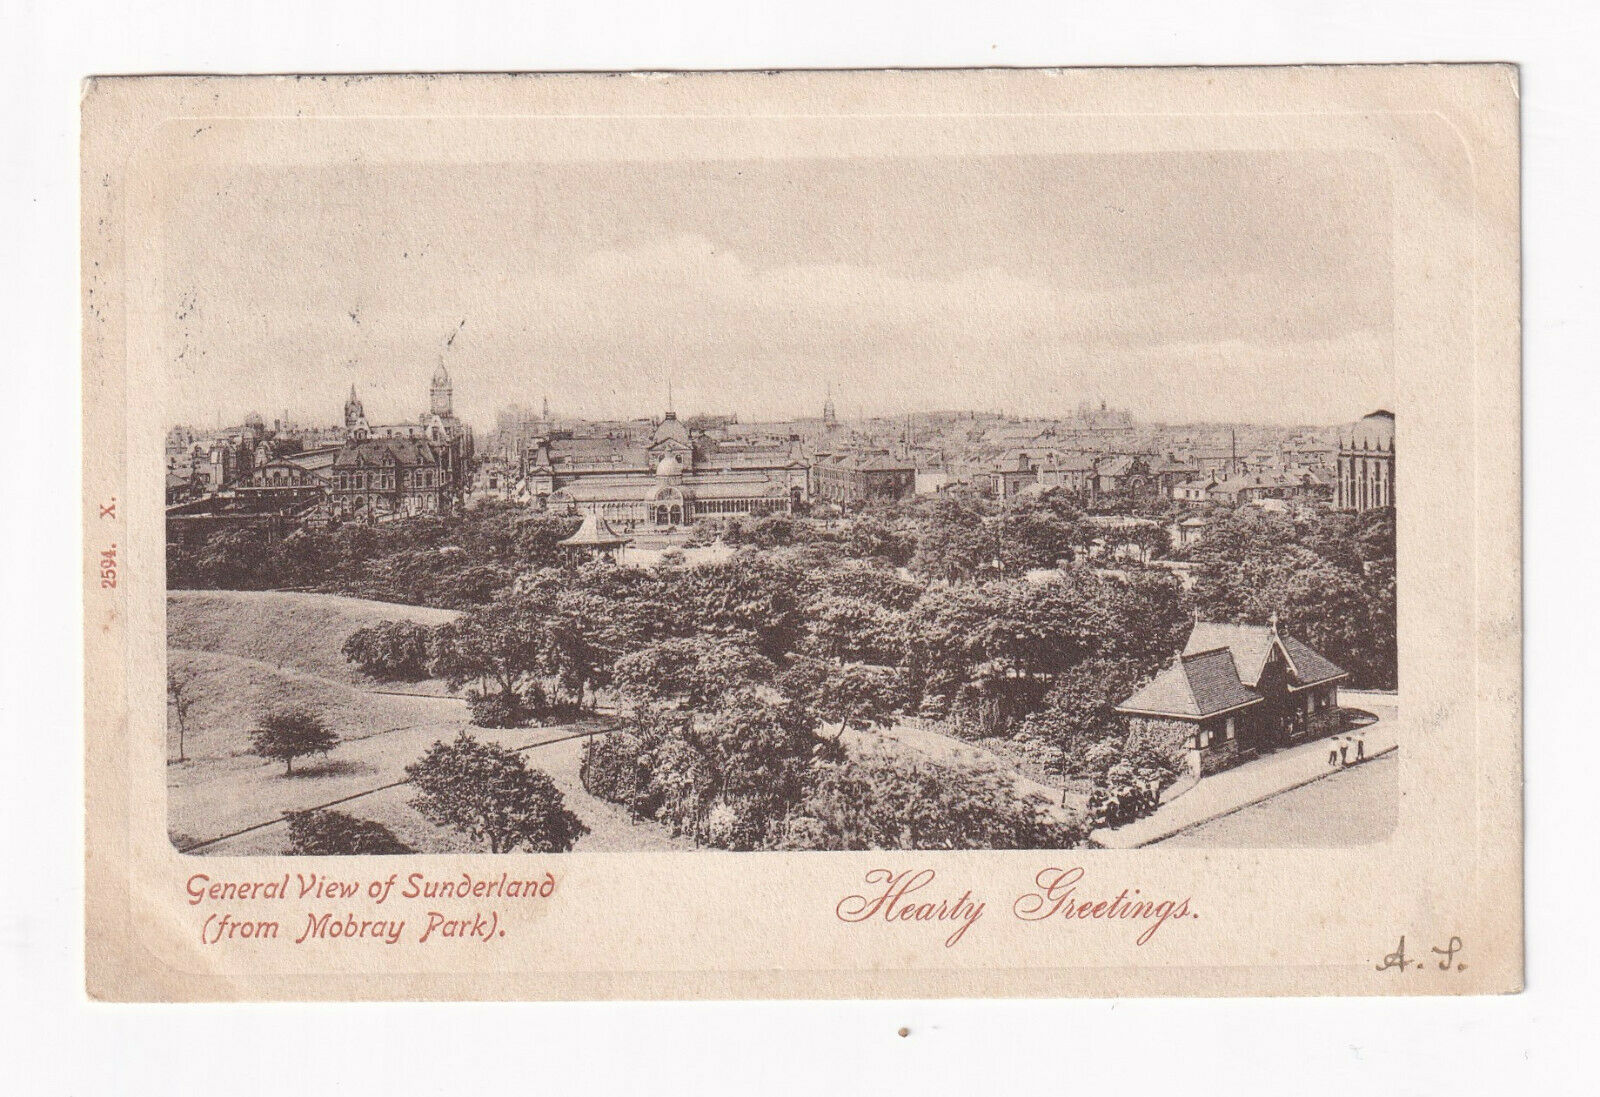 House Clearance - Printed Service General View Of Sunderland From Mobray Park